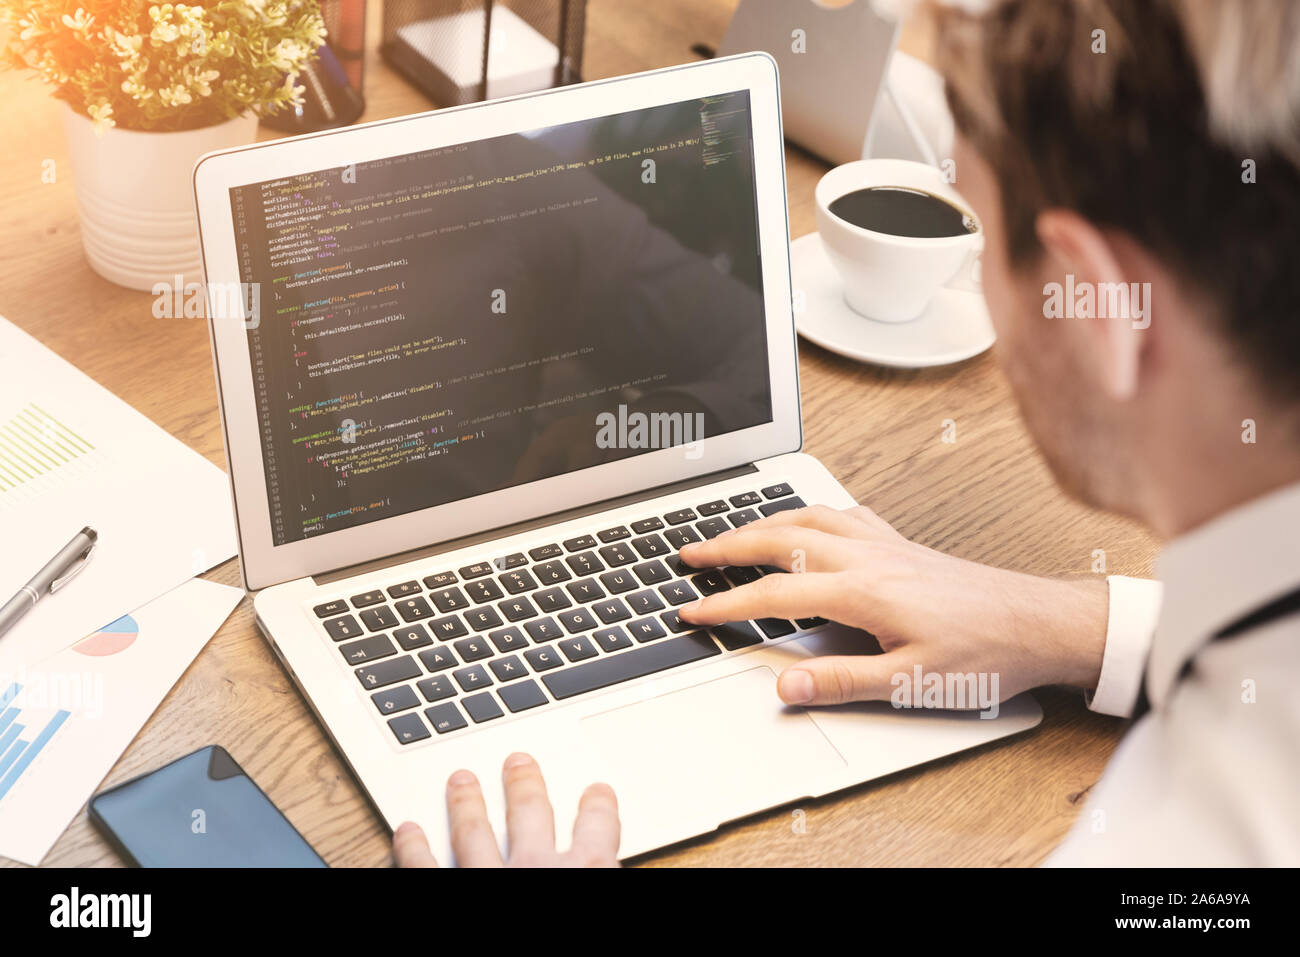 Programmer working on code in office. Man working on laptop. Stock Photo